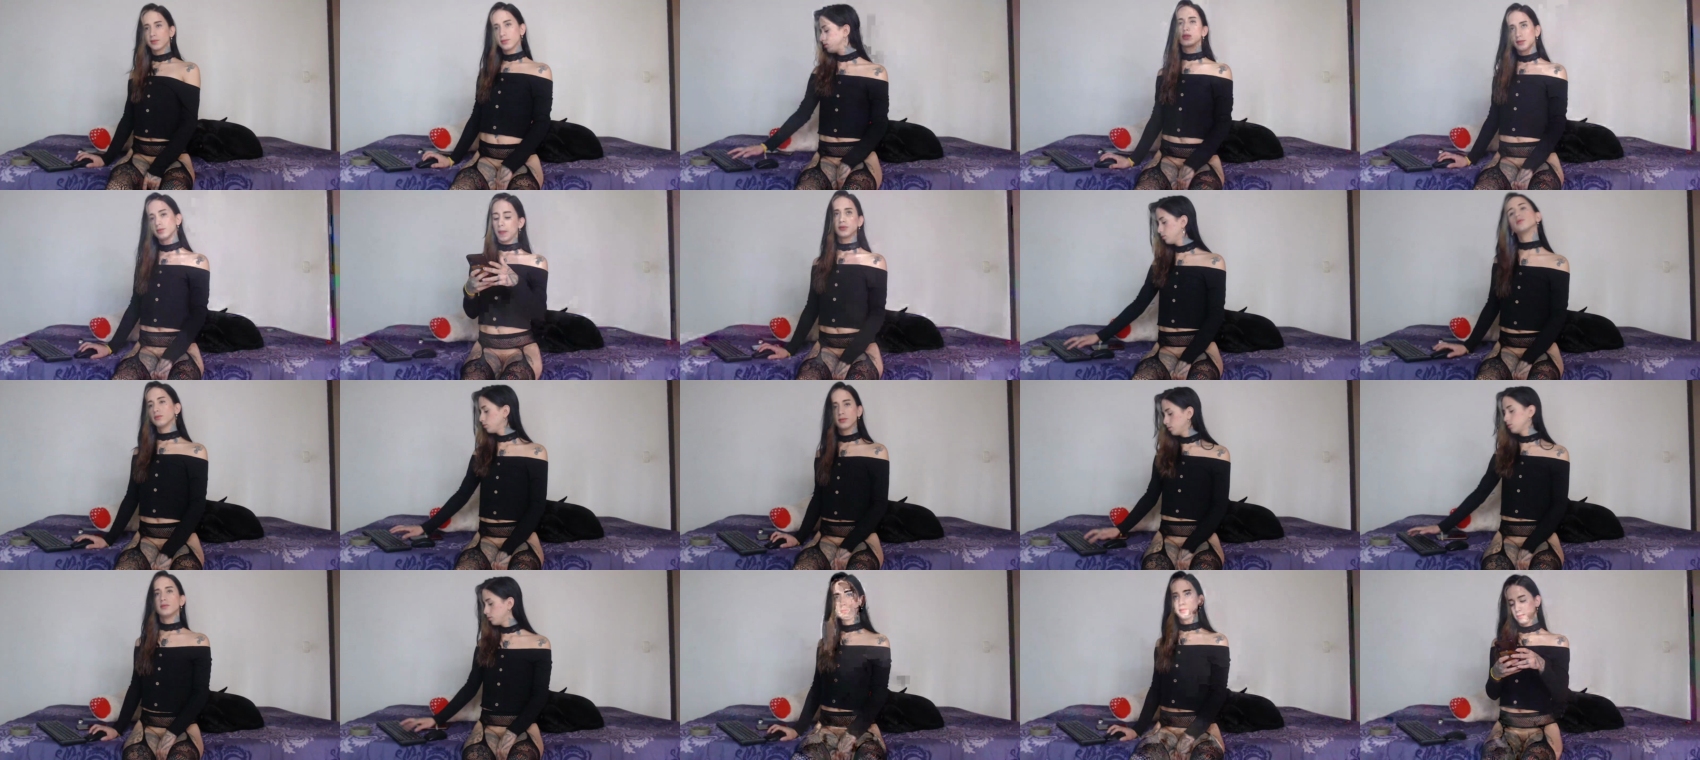 mely_roussex lickass CAM SHOW @ Chaturbate 22-03-2022